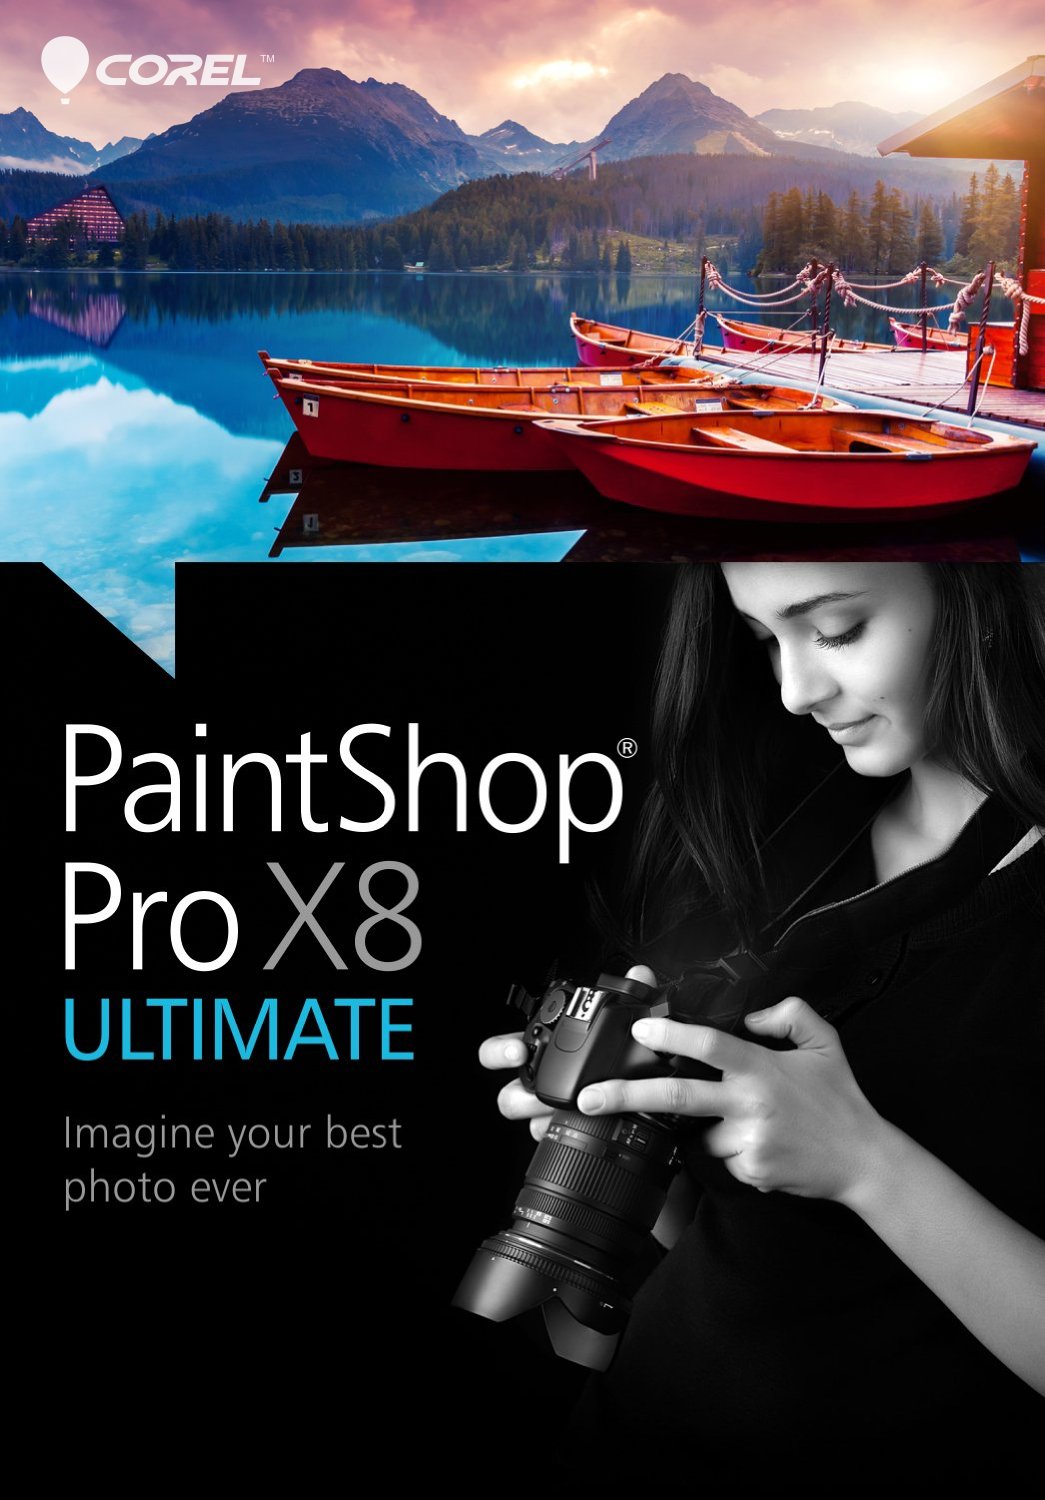 Amazon DEAL OF THE DAY – PaintShop Pro X8 Ultimate Download – Only $29.99!